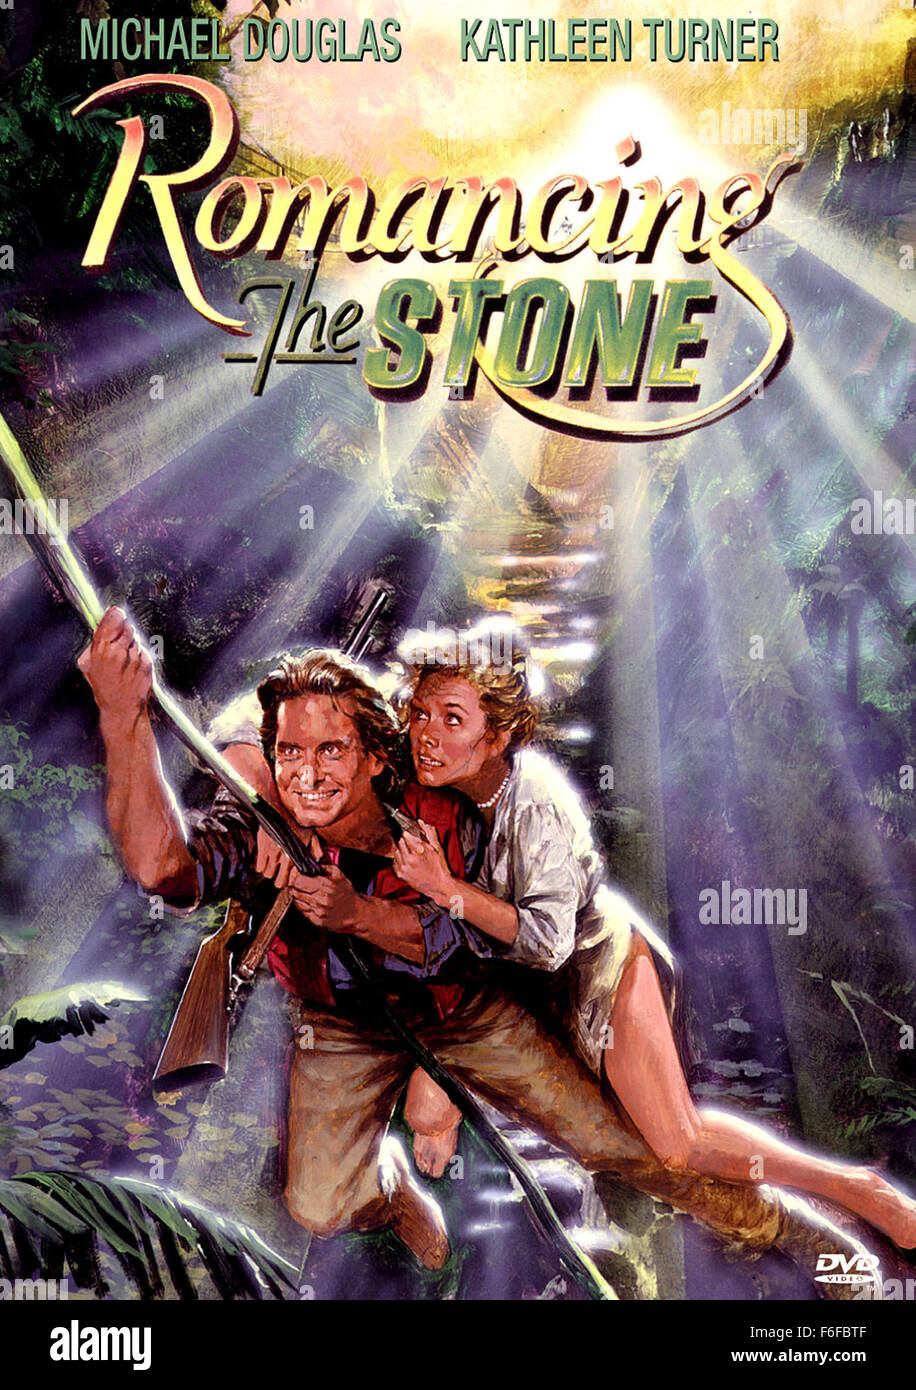 Nov 07, 1984; Hollywood, CA, USA; Image from director Robert Zemeckis' action adventure 'Romancing the Stone' starring MICHAEL DOUGLAS as Jack T. Colton and KATHLEEN TURNER as Joan Wilder. Stock Photo